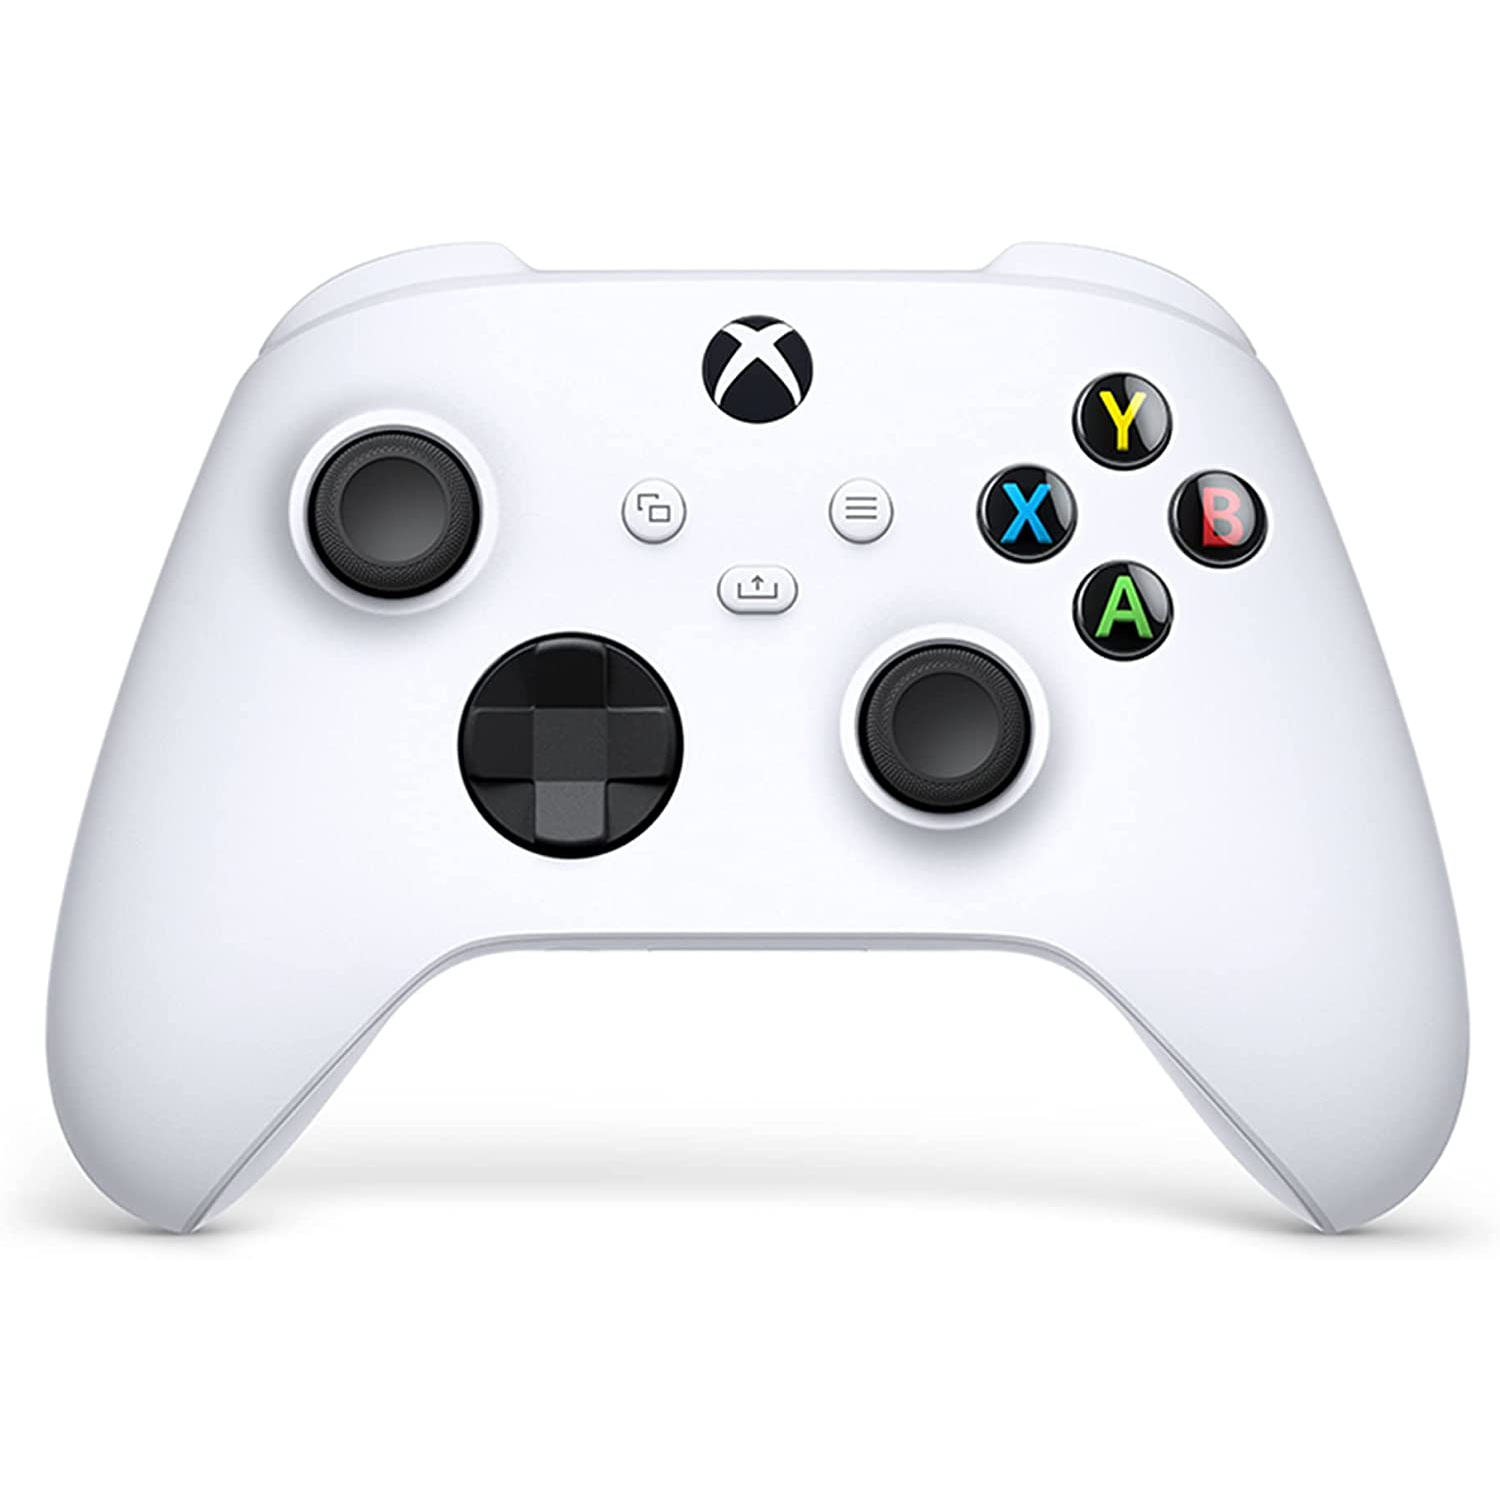 Openbox Xbox Wireless Controller for Xbox Series X|S, Xbox One, and Windows Devices – Robot White